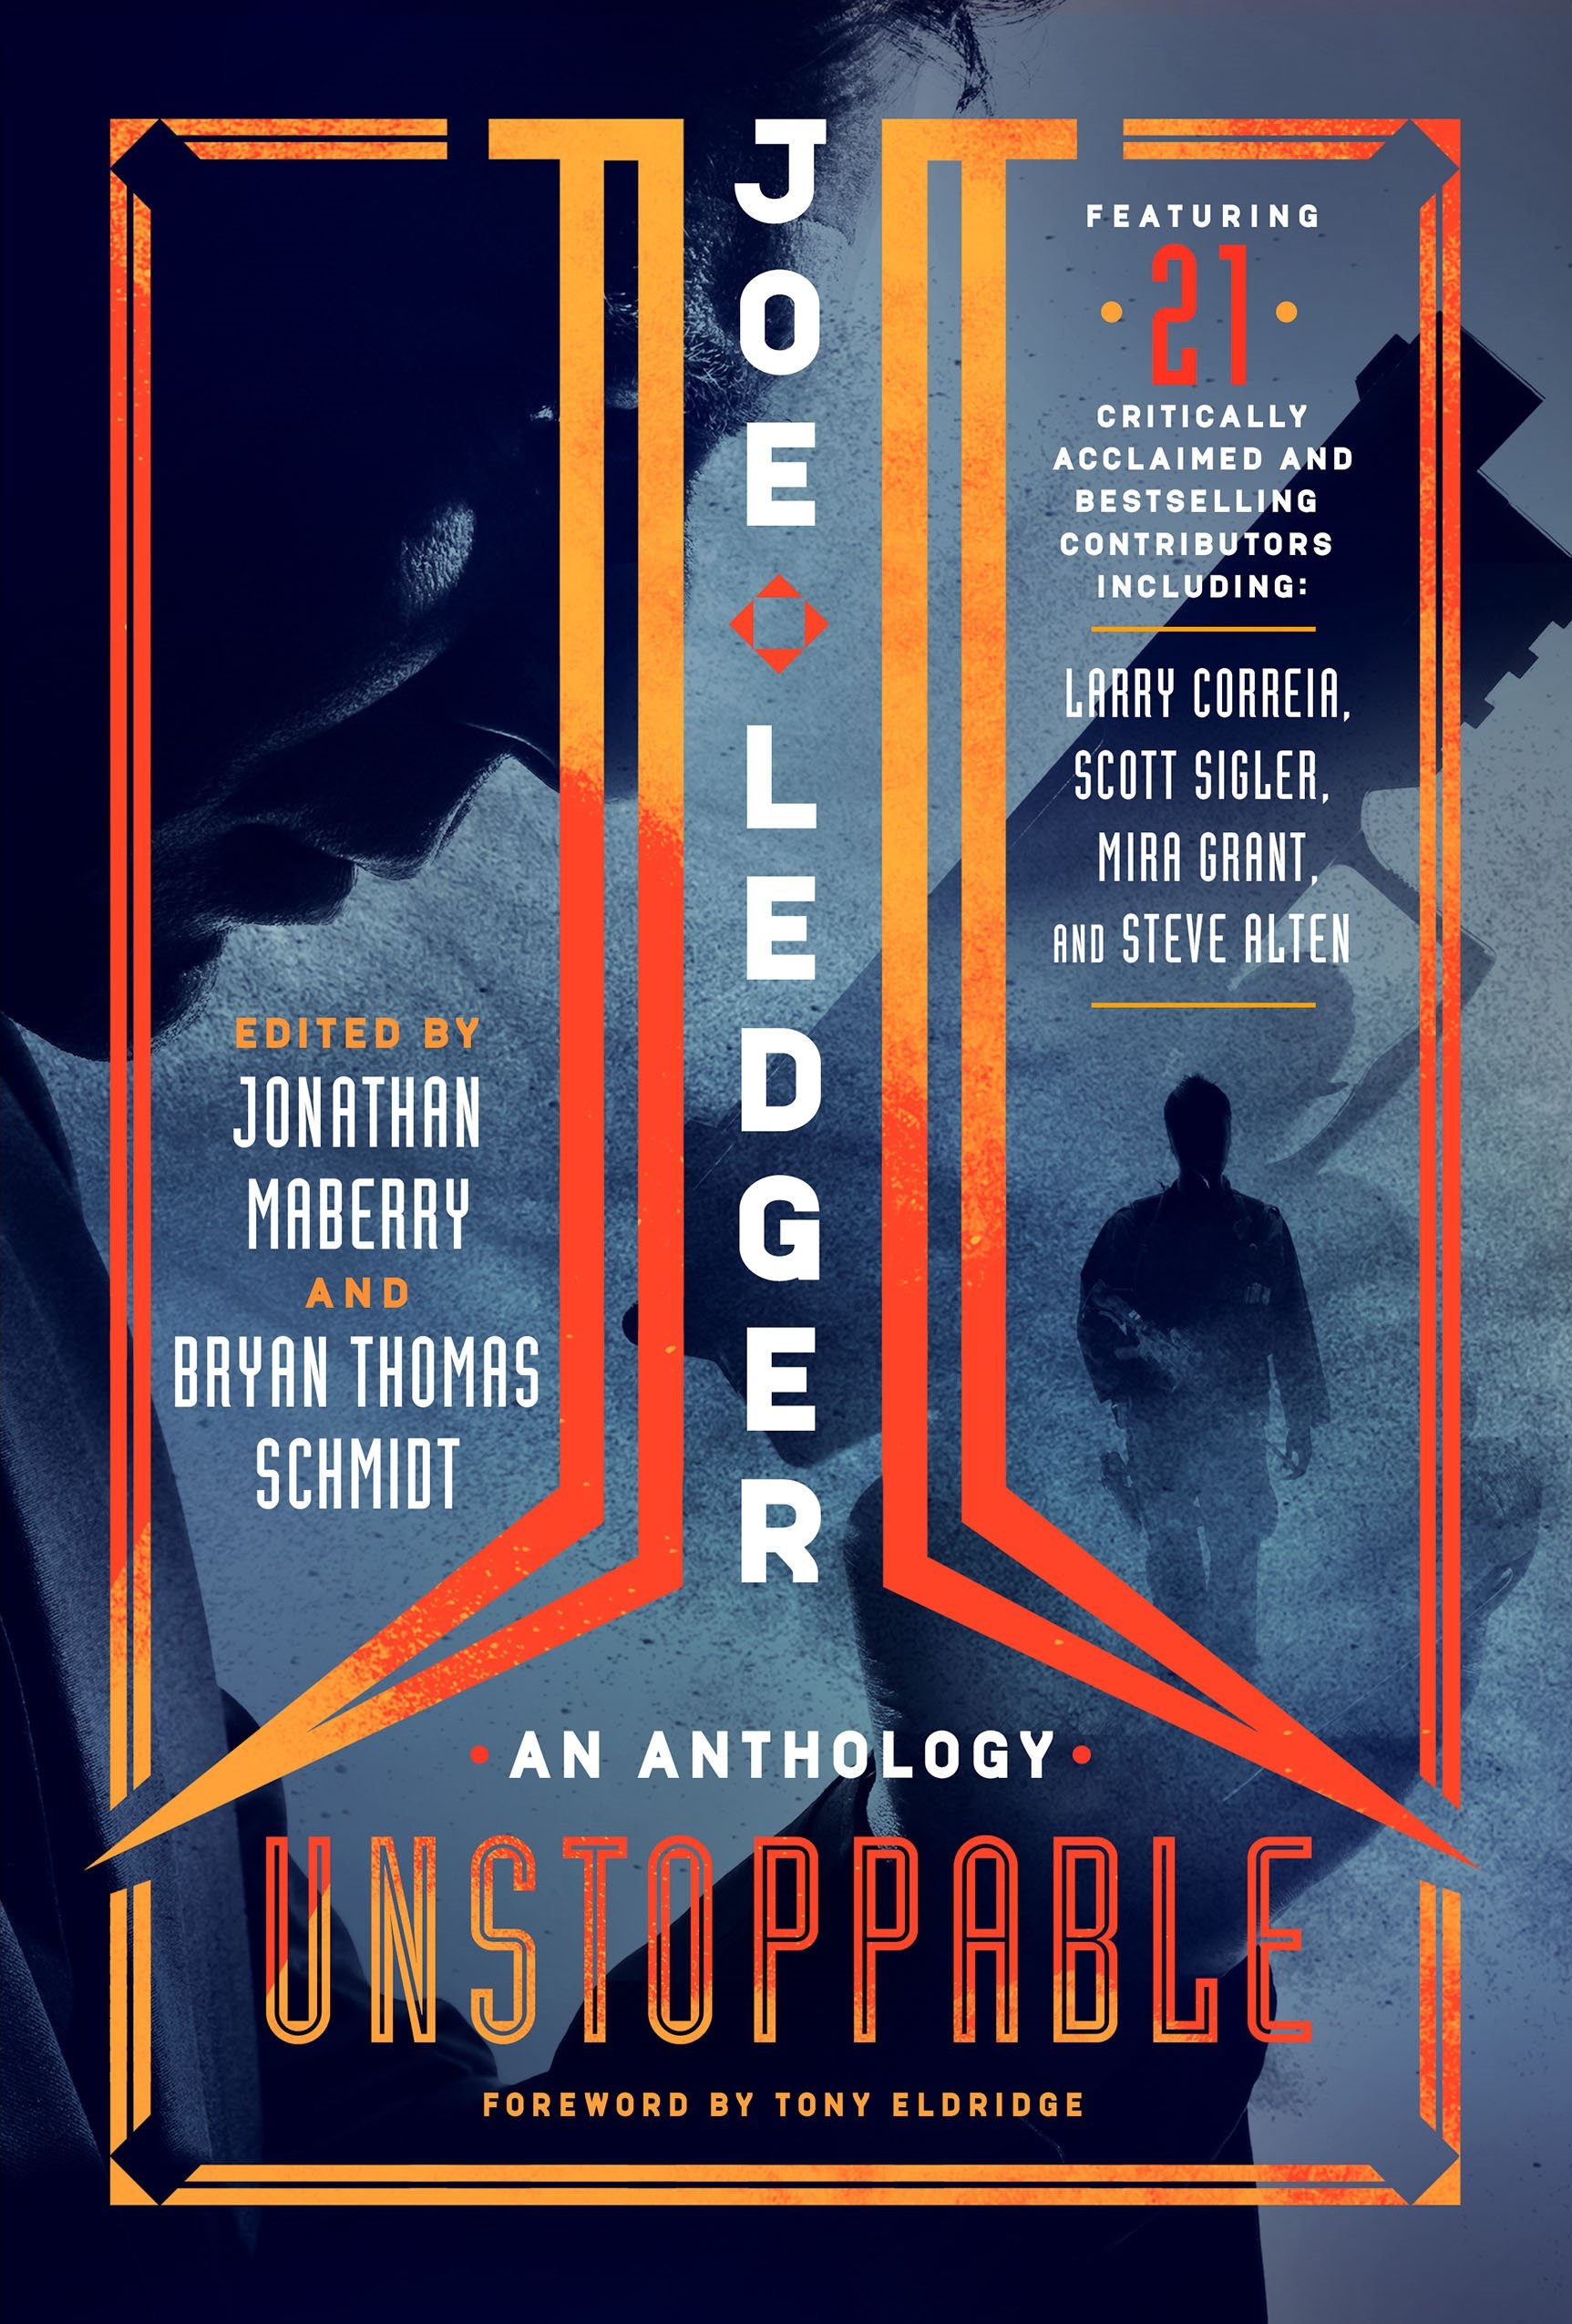 Joe Ledger - Unstoppable - edited by Jonathan Maberry and Bryan Thomas Schmidt